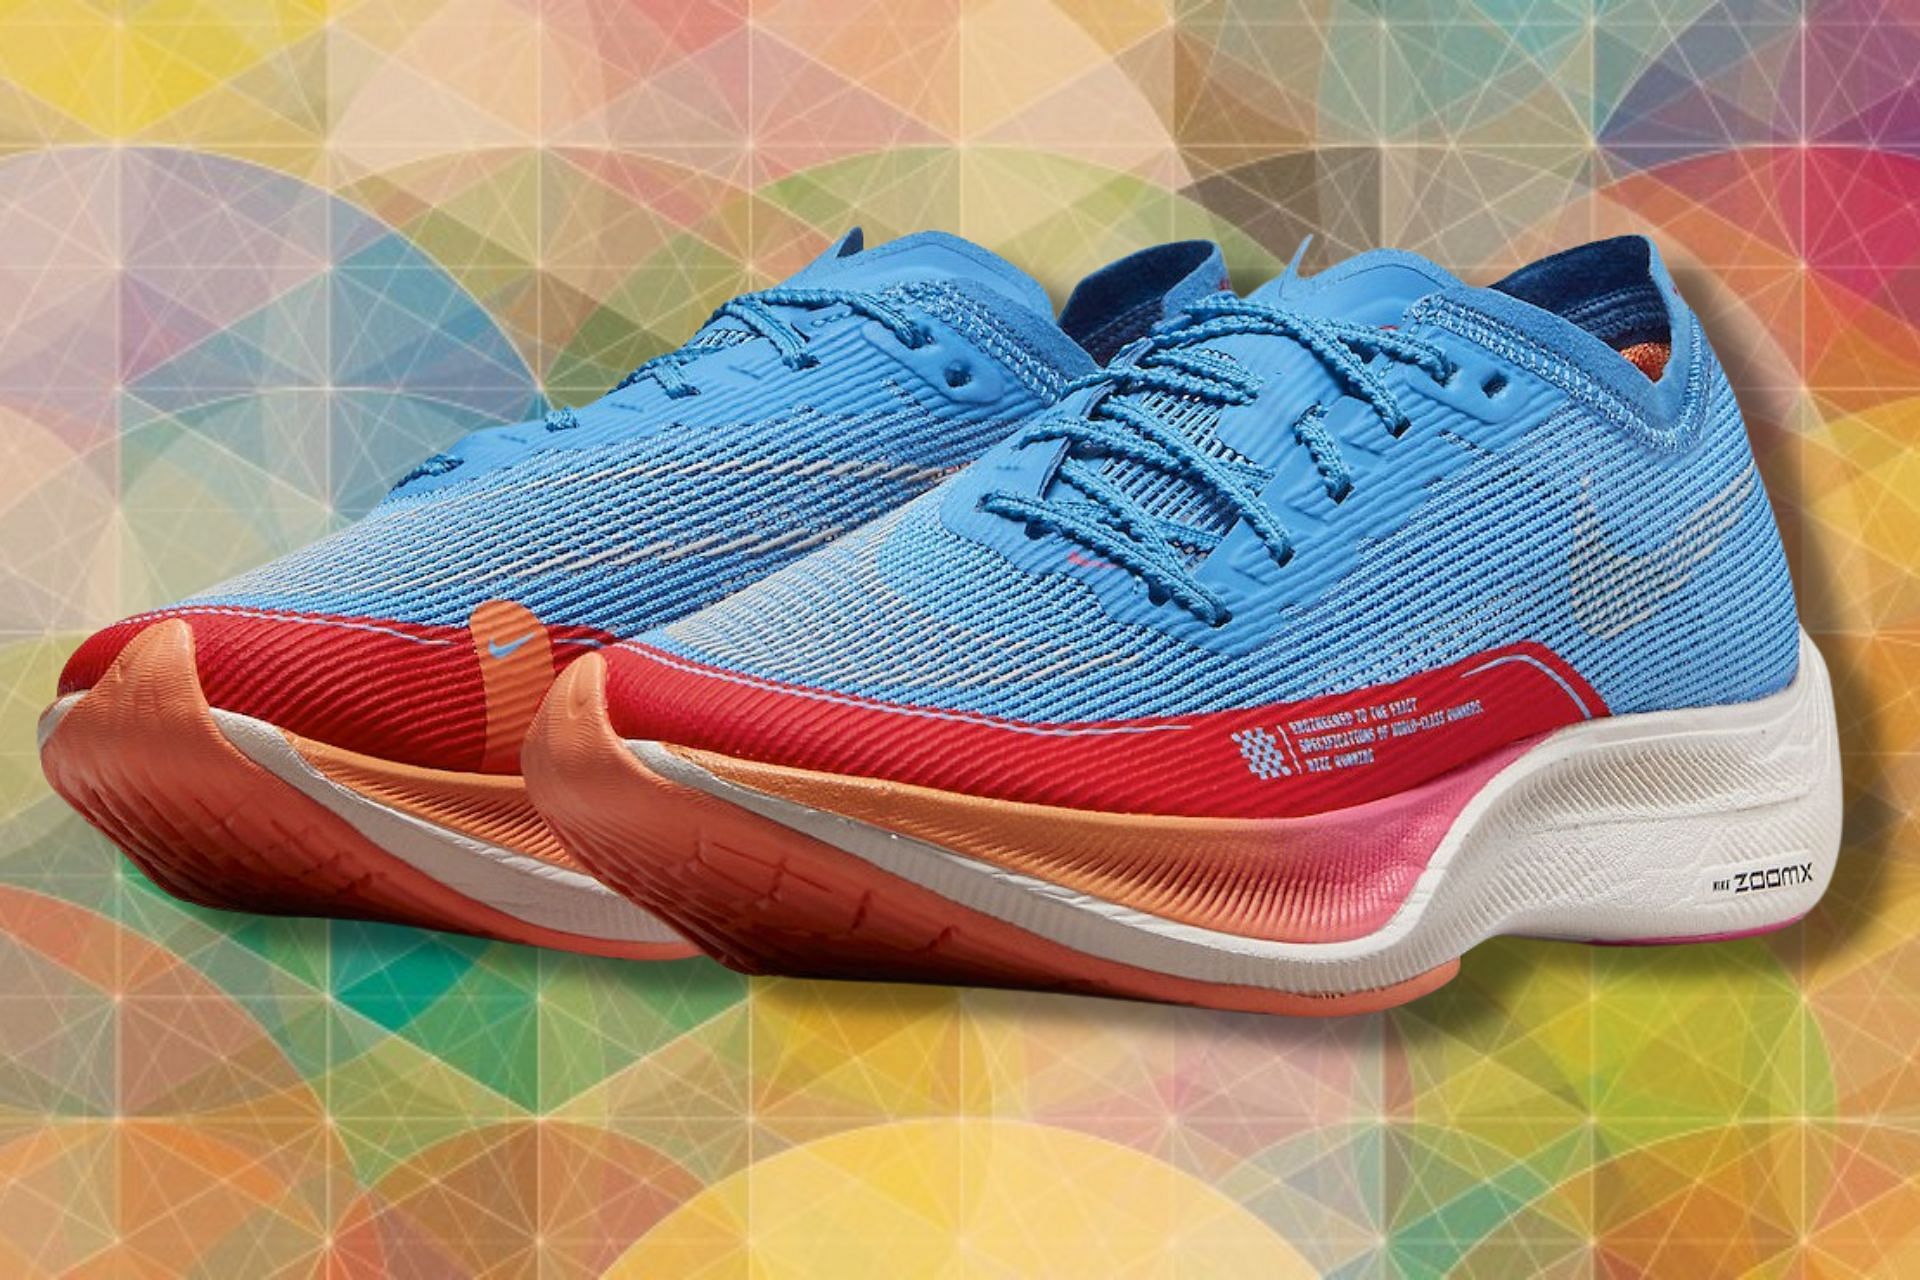 ZoomX VaporFly NEXT% 2 For Future Me colorway (Image via Nike)